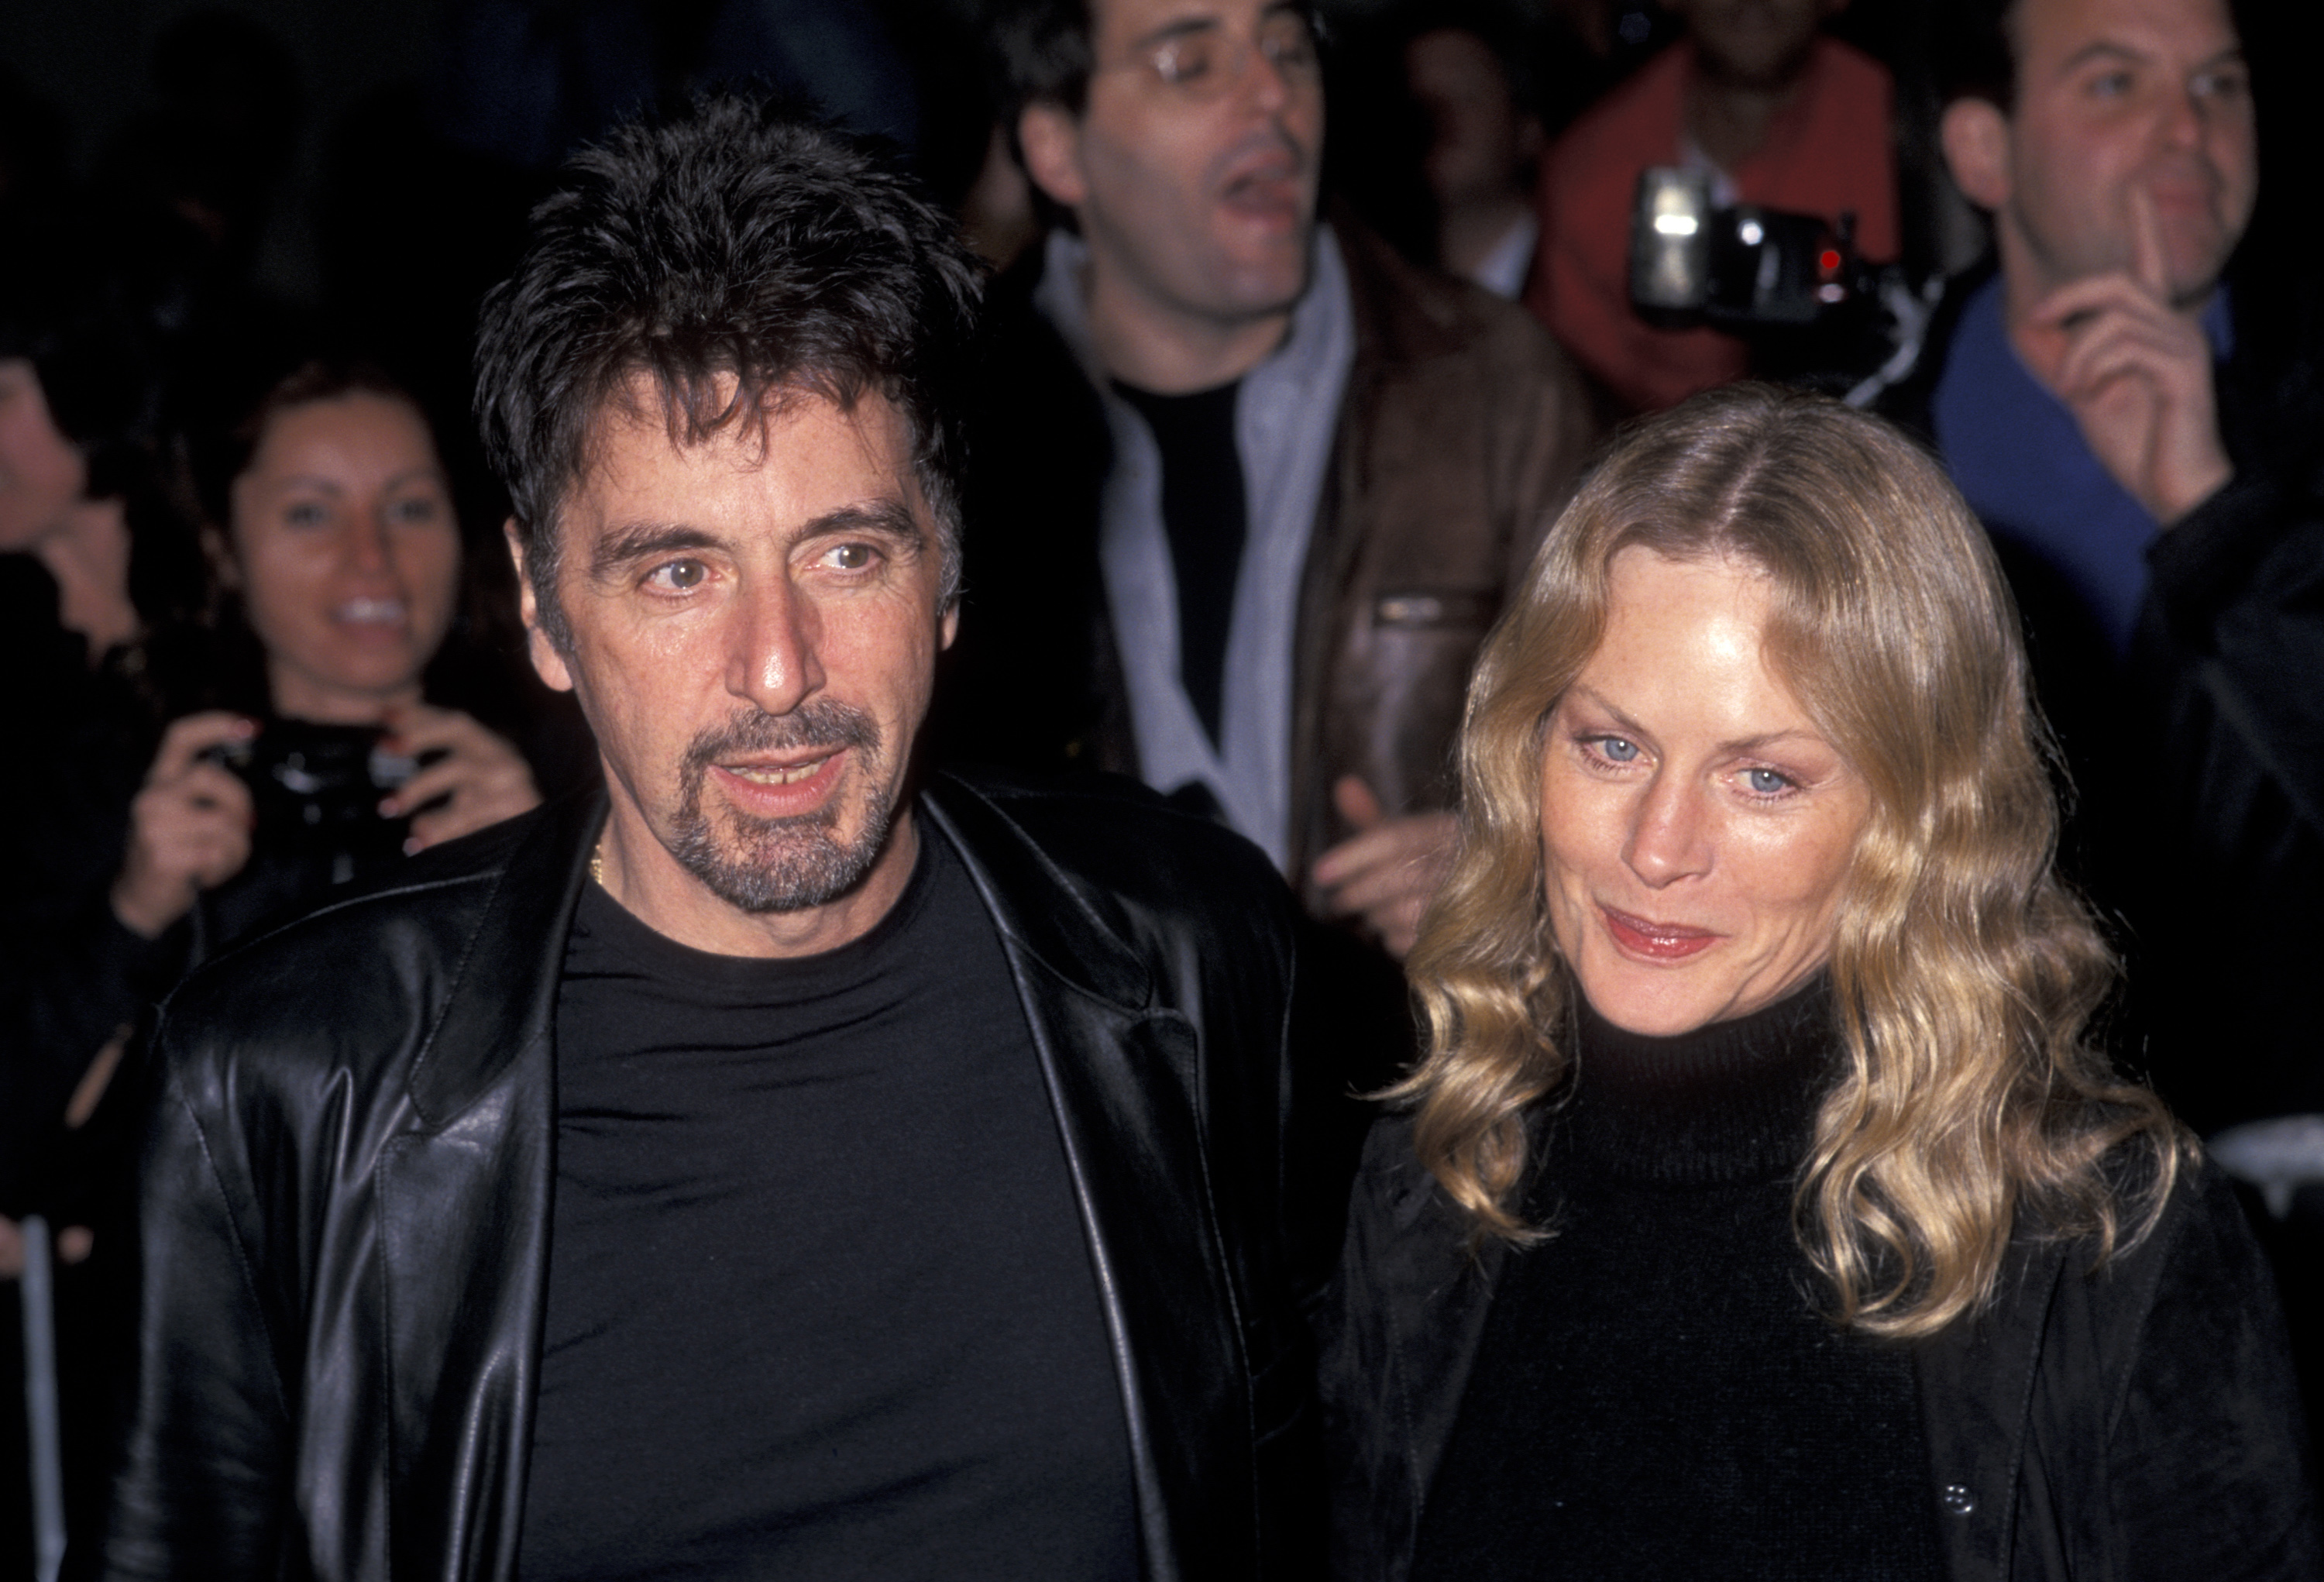 Al Pacino and actress Beverly D'Angelo attending the premiere of "The Insider" on November 1, 1999 at the Ziegfeld Theater in New York City, New York | Source: Getty Images